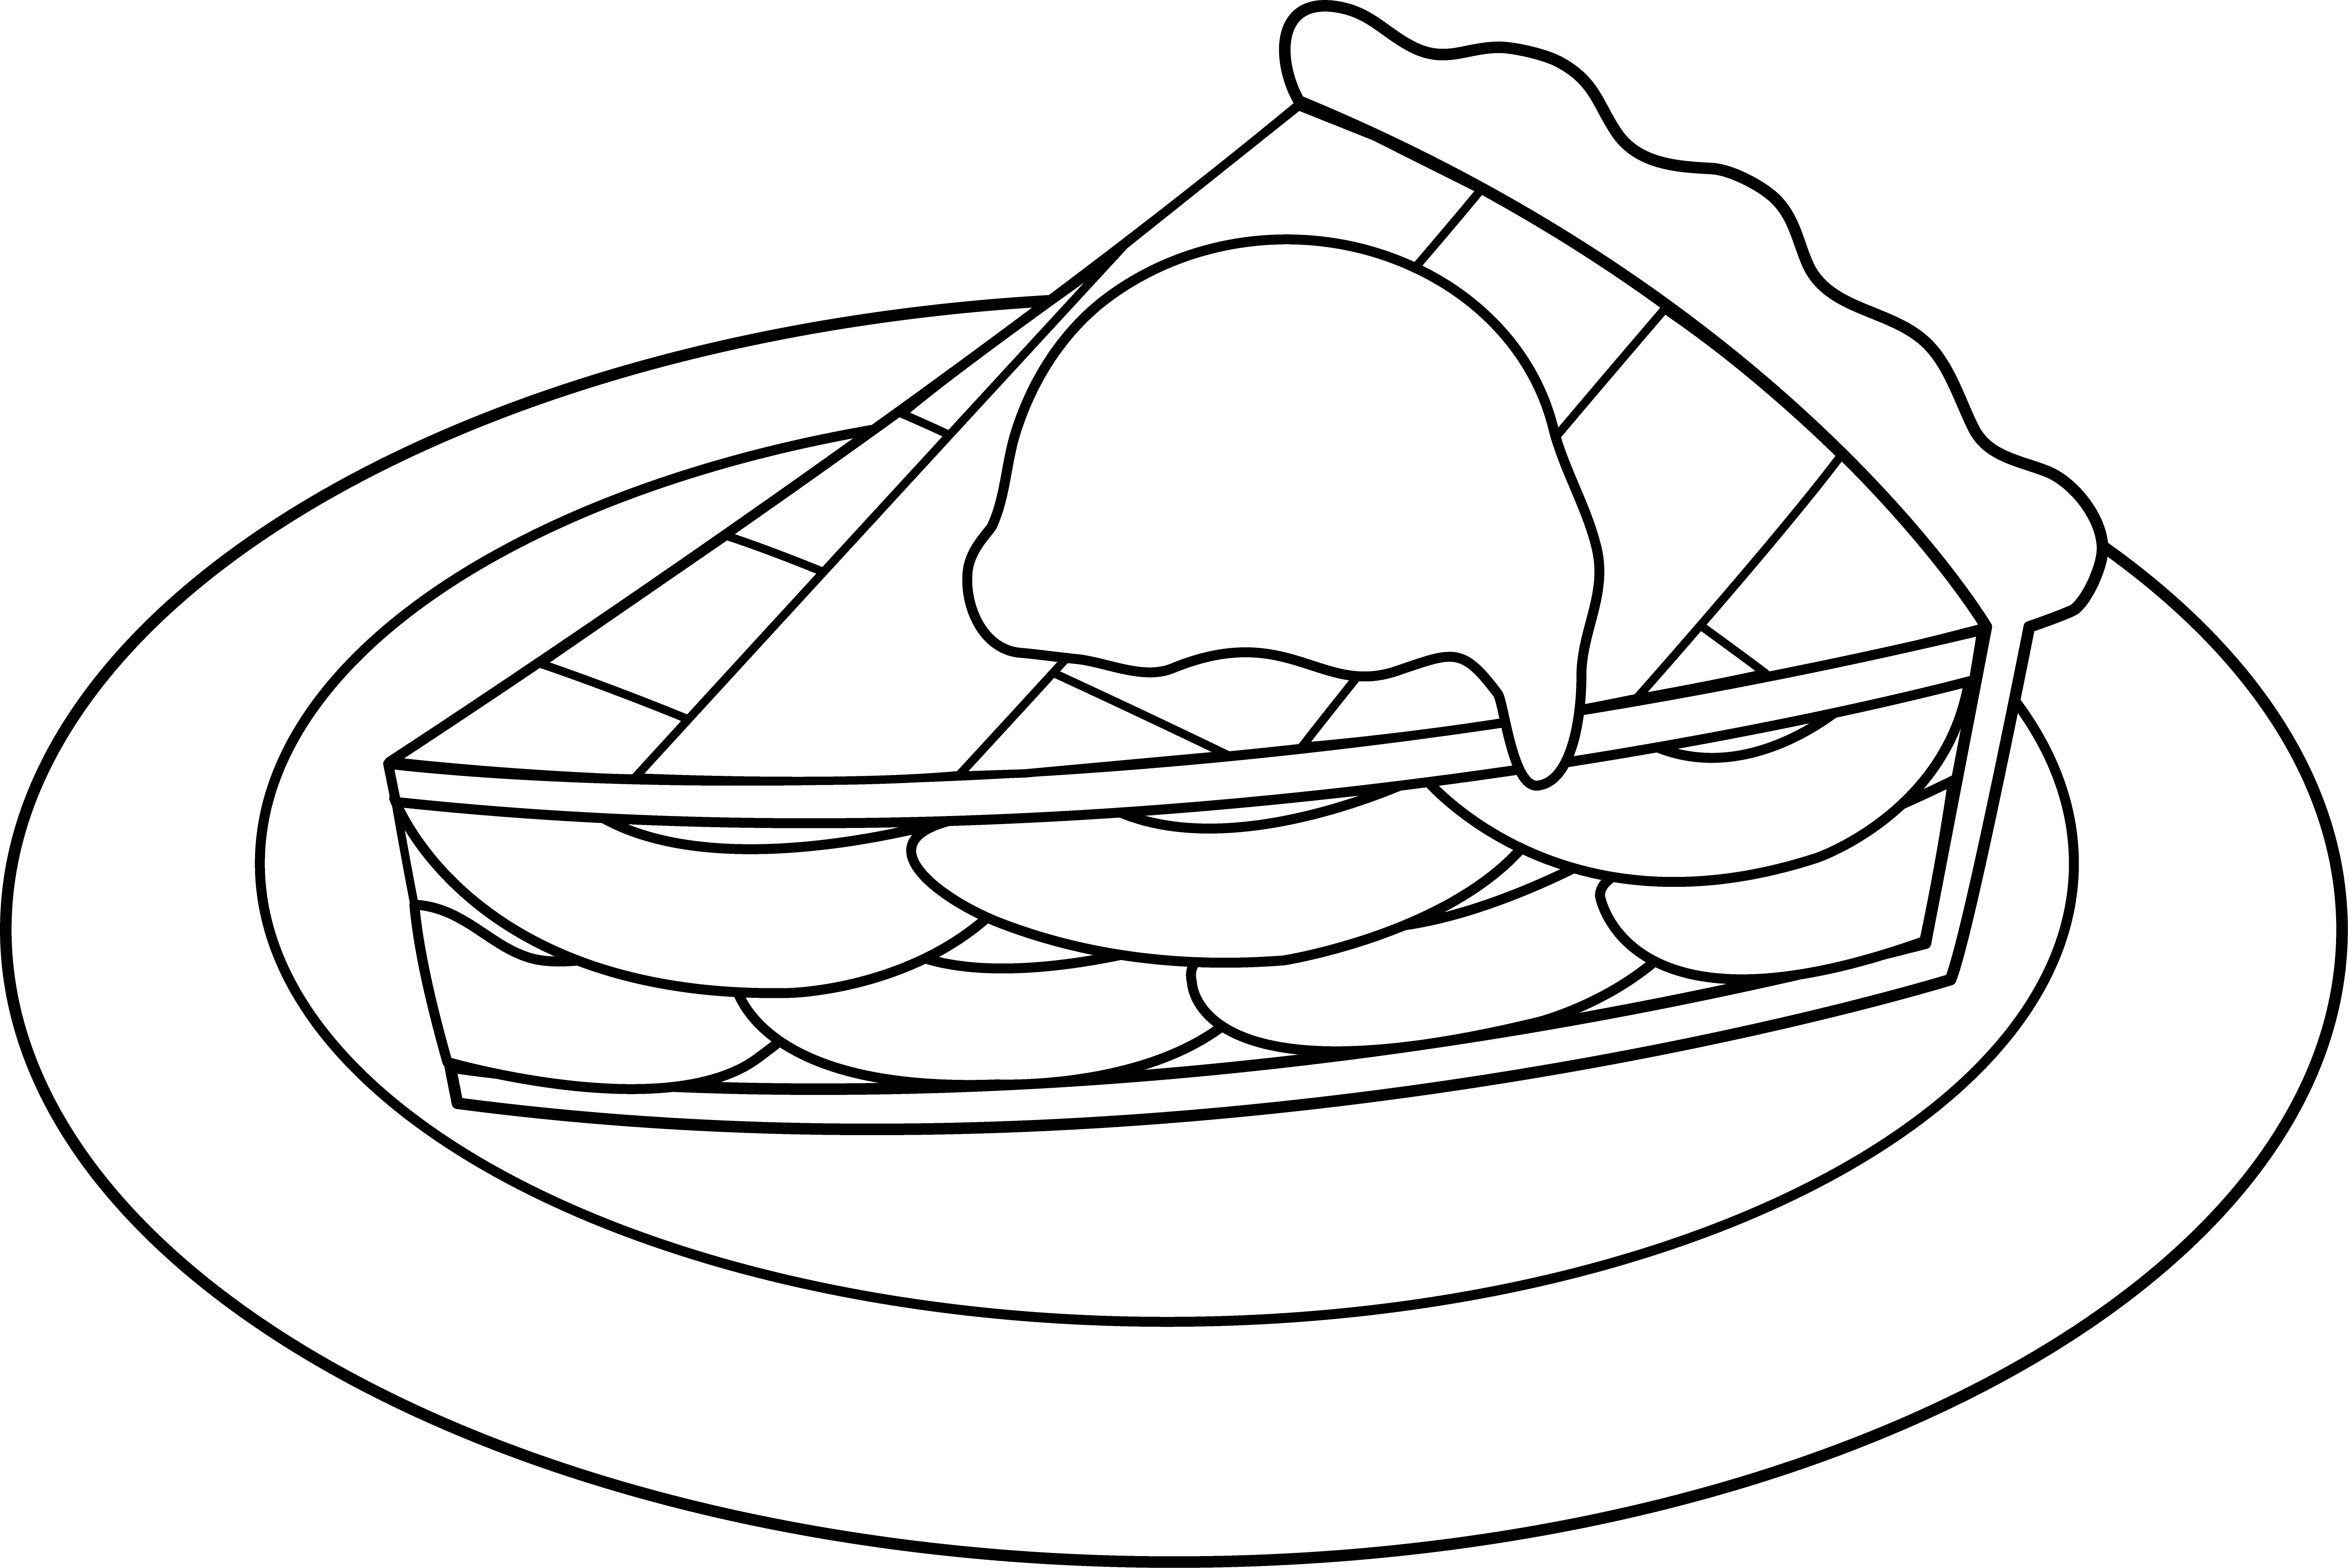 Pie Black And White Clipart Apple Pie With Ice Cream Clip